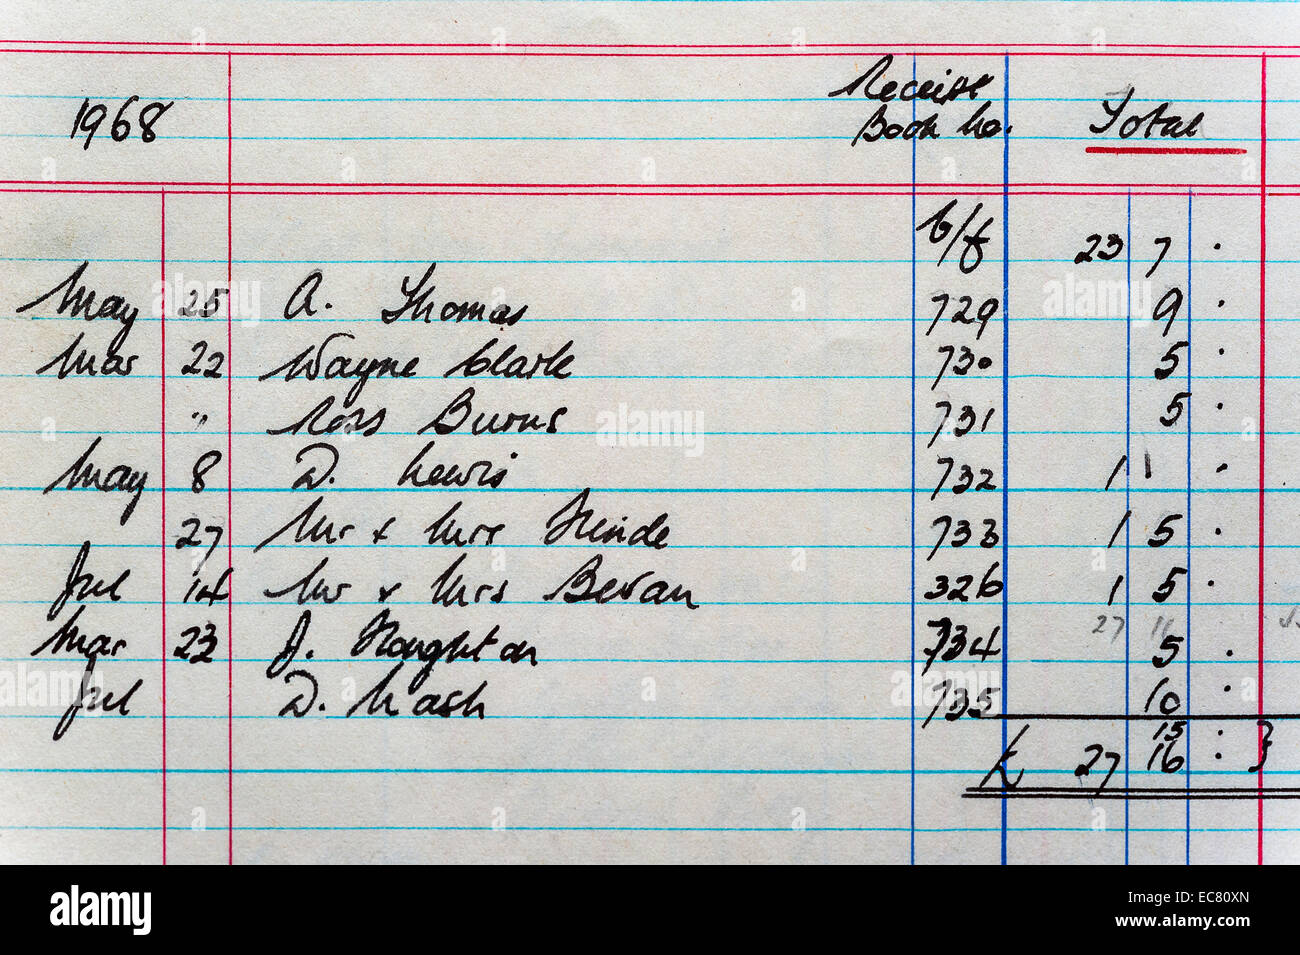 Close up view of an old accounts book with handwritten entries Stock Photo